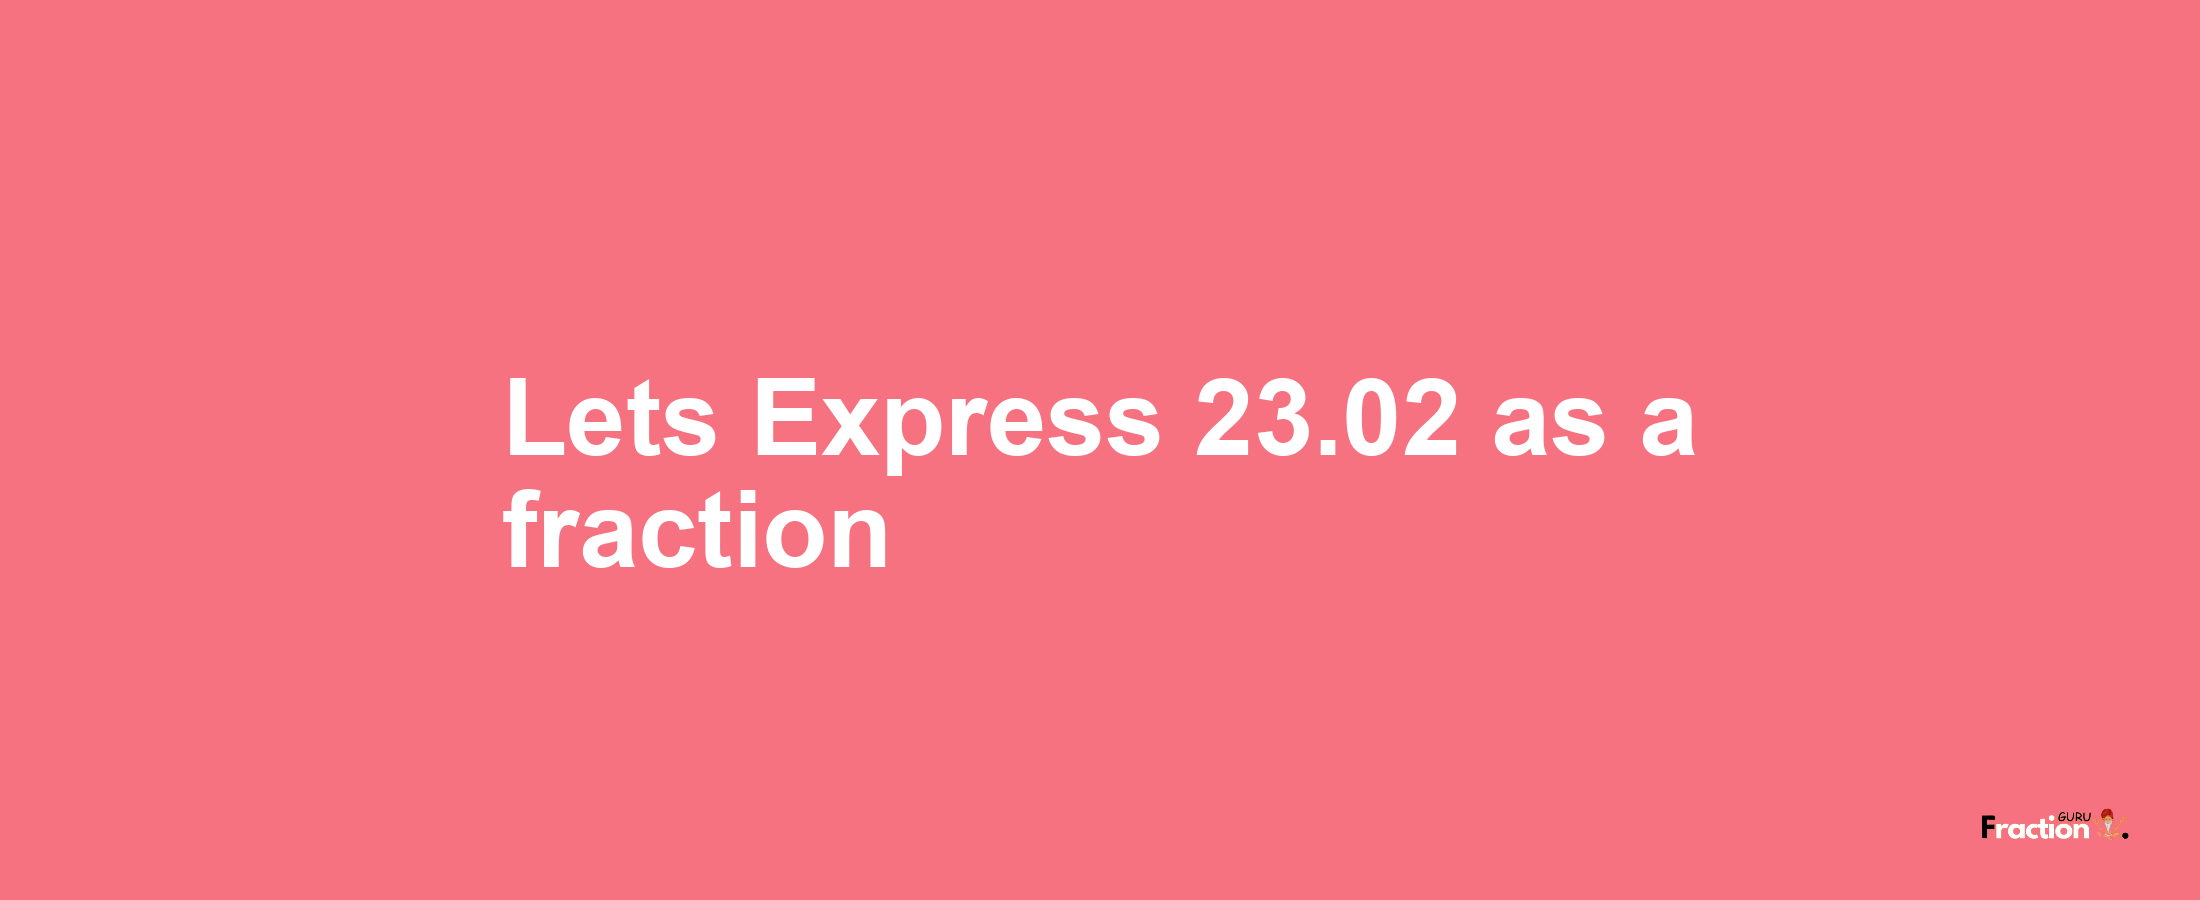 Lets Express 23.02 as afraction